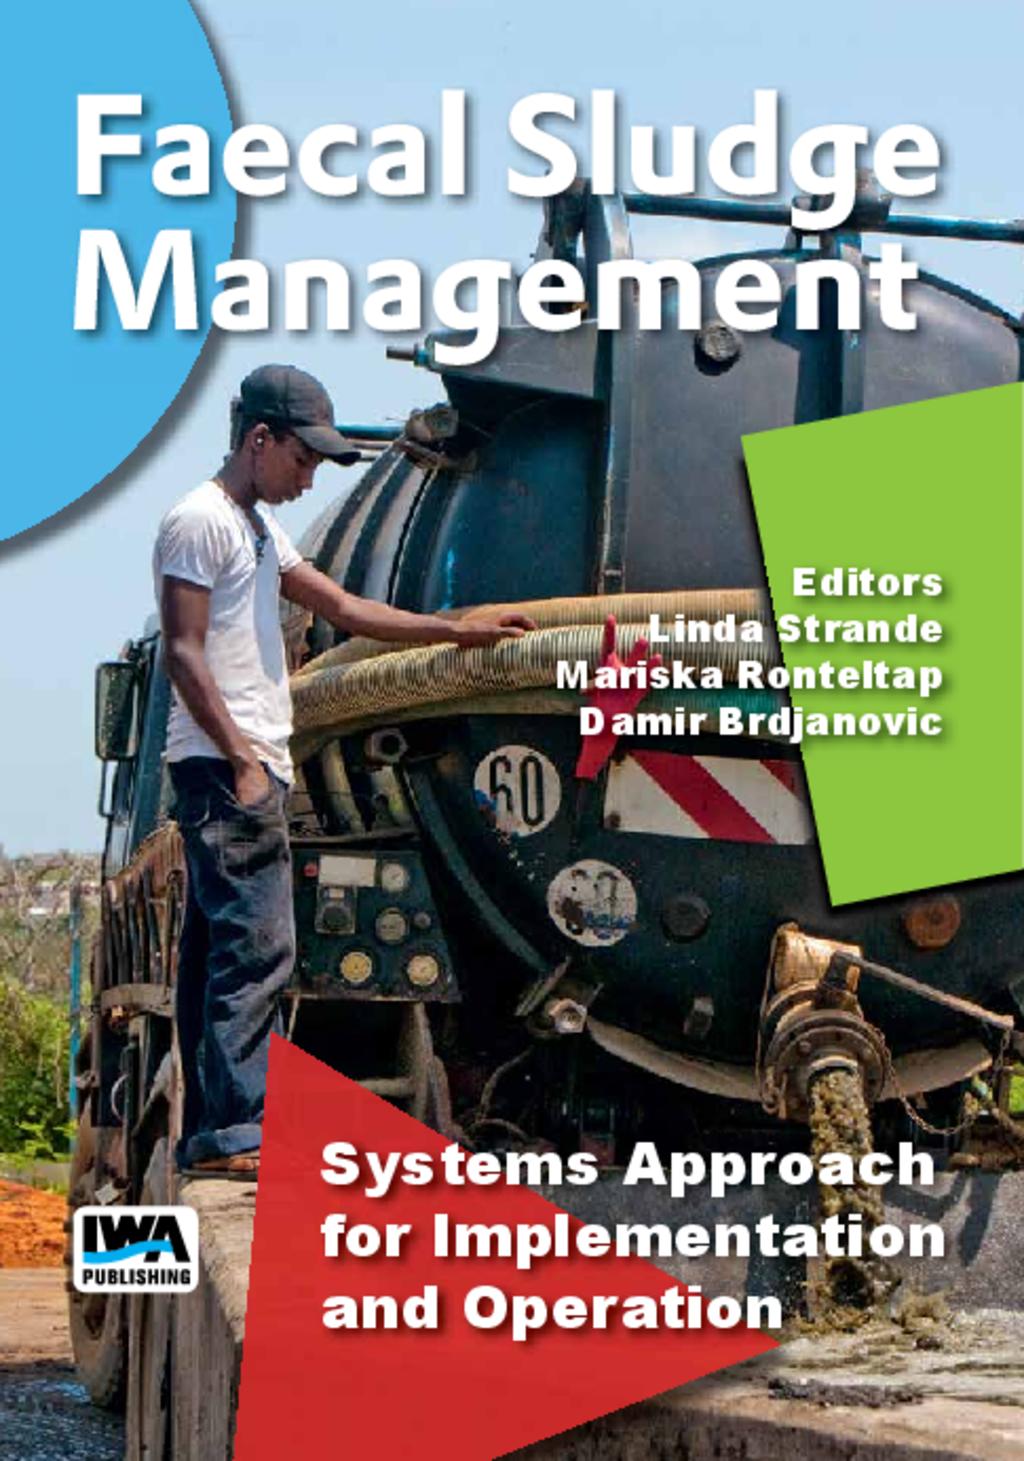 Faecal Sludge Management: Systems Approach for Implementation and Operation